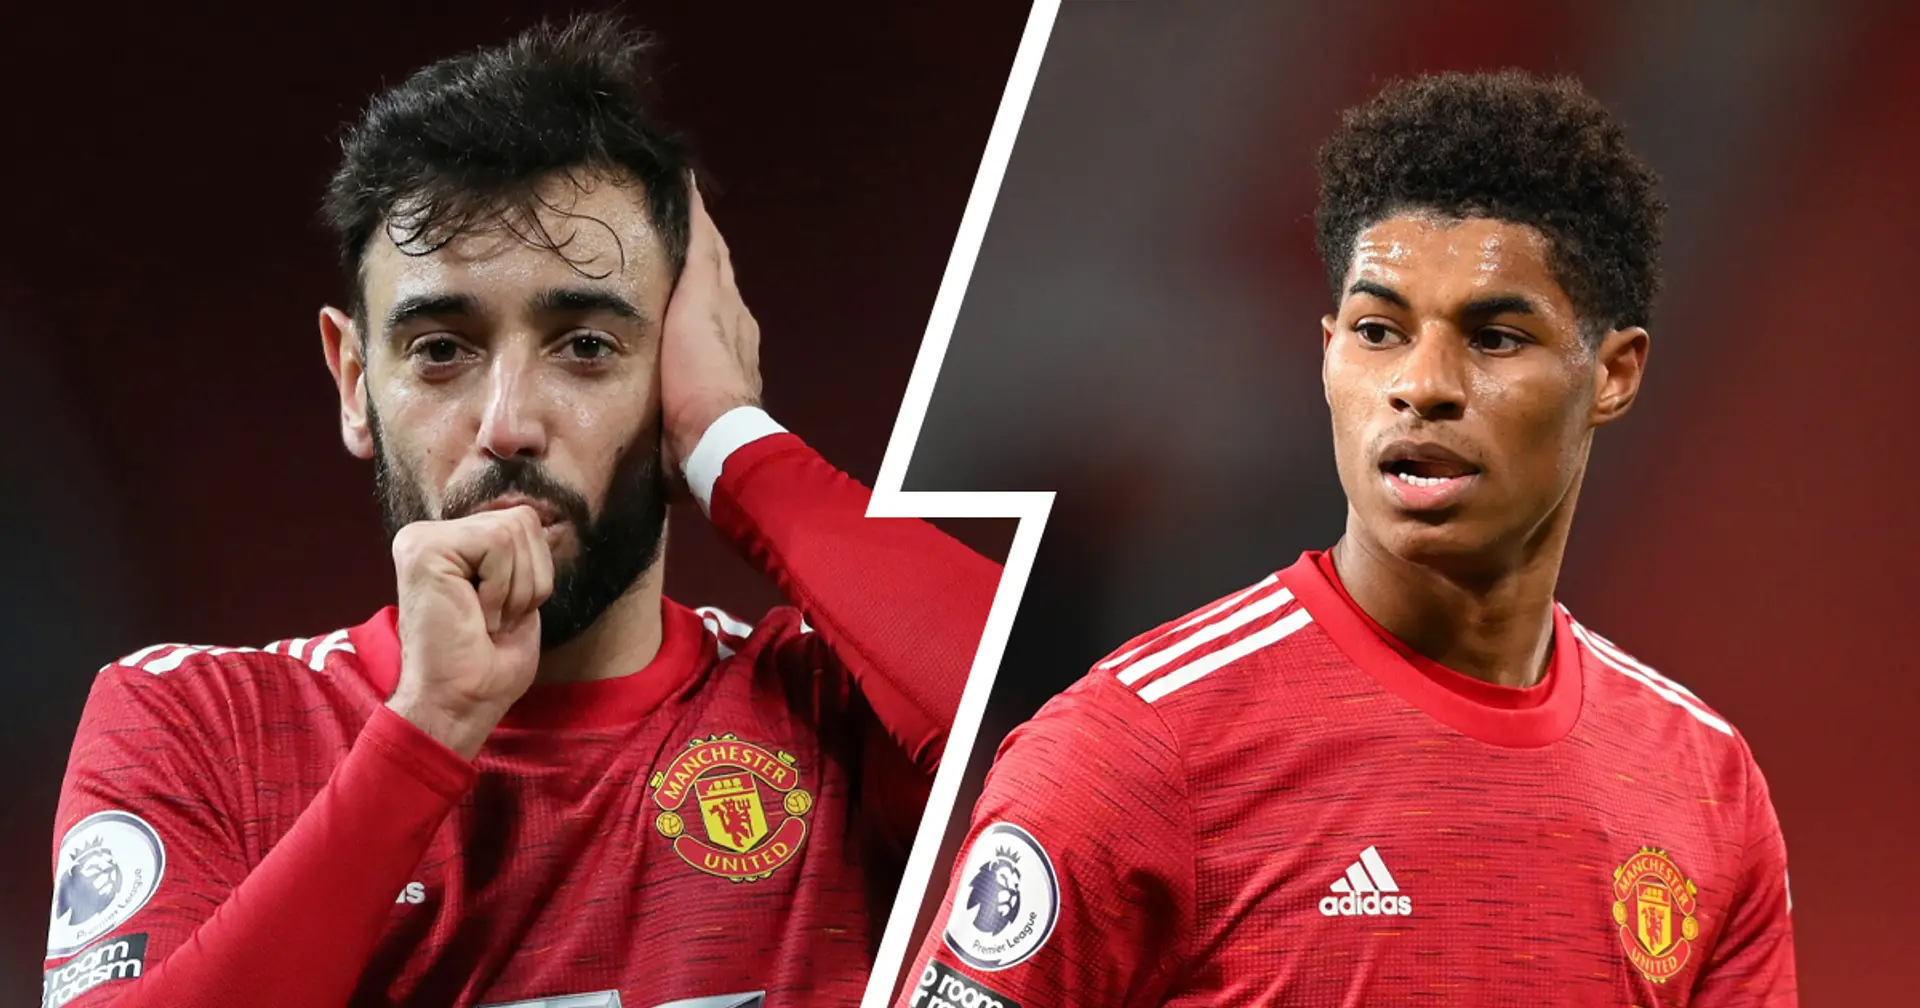 Golden Boot race: where do Bruno and Rashford stand after 16 games?